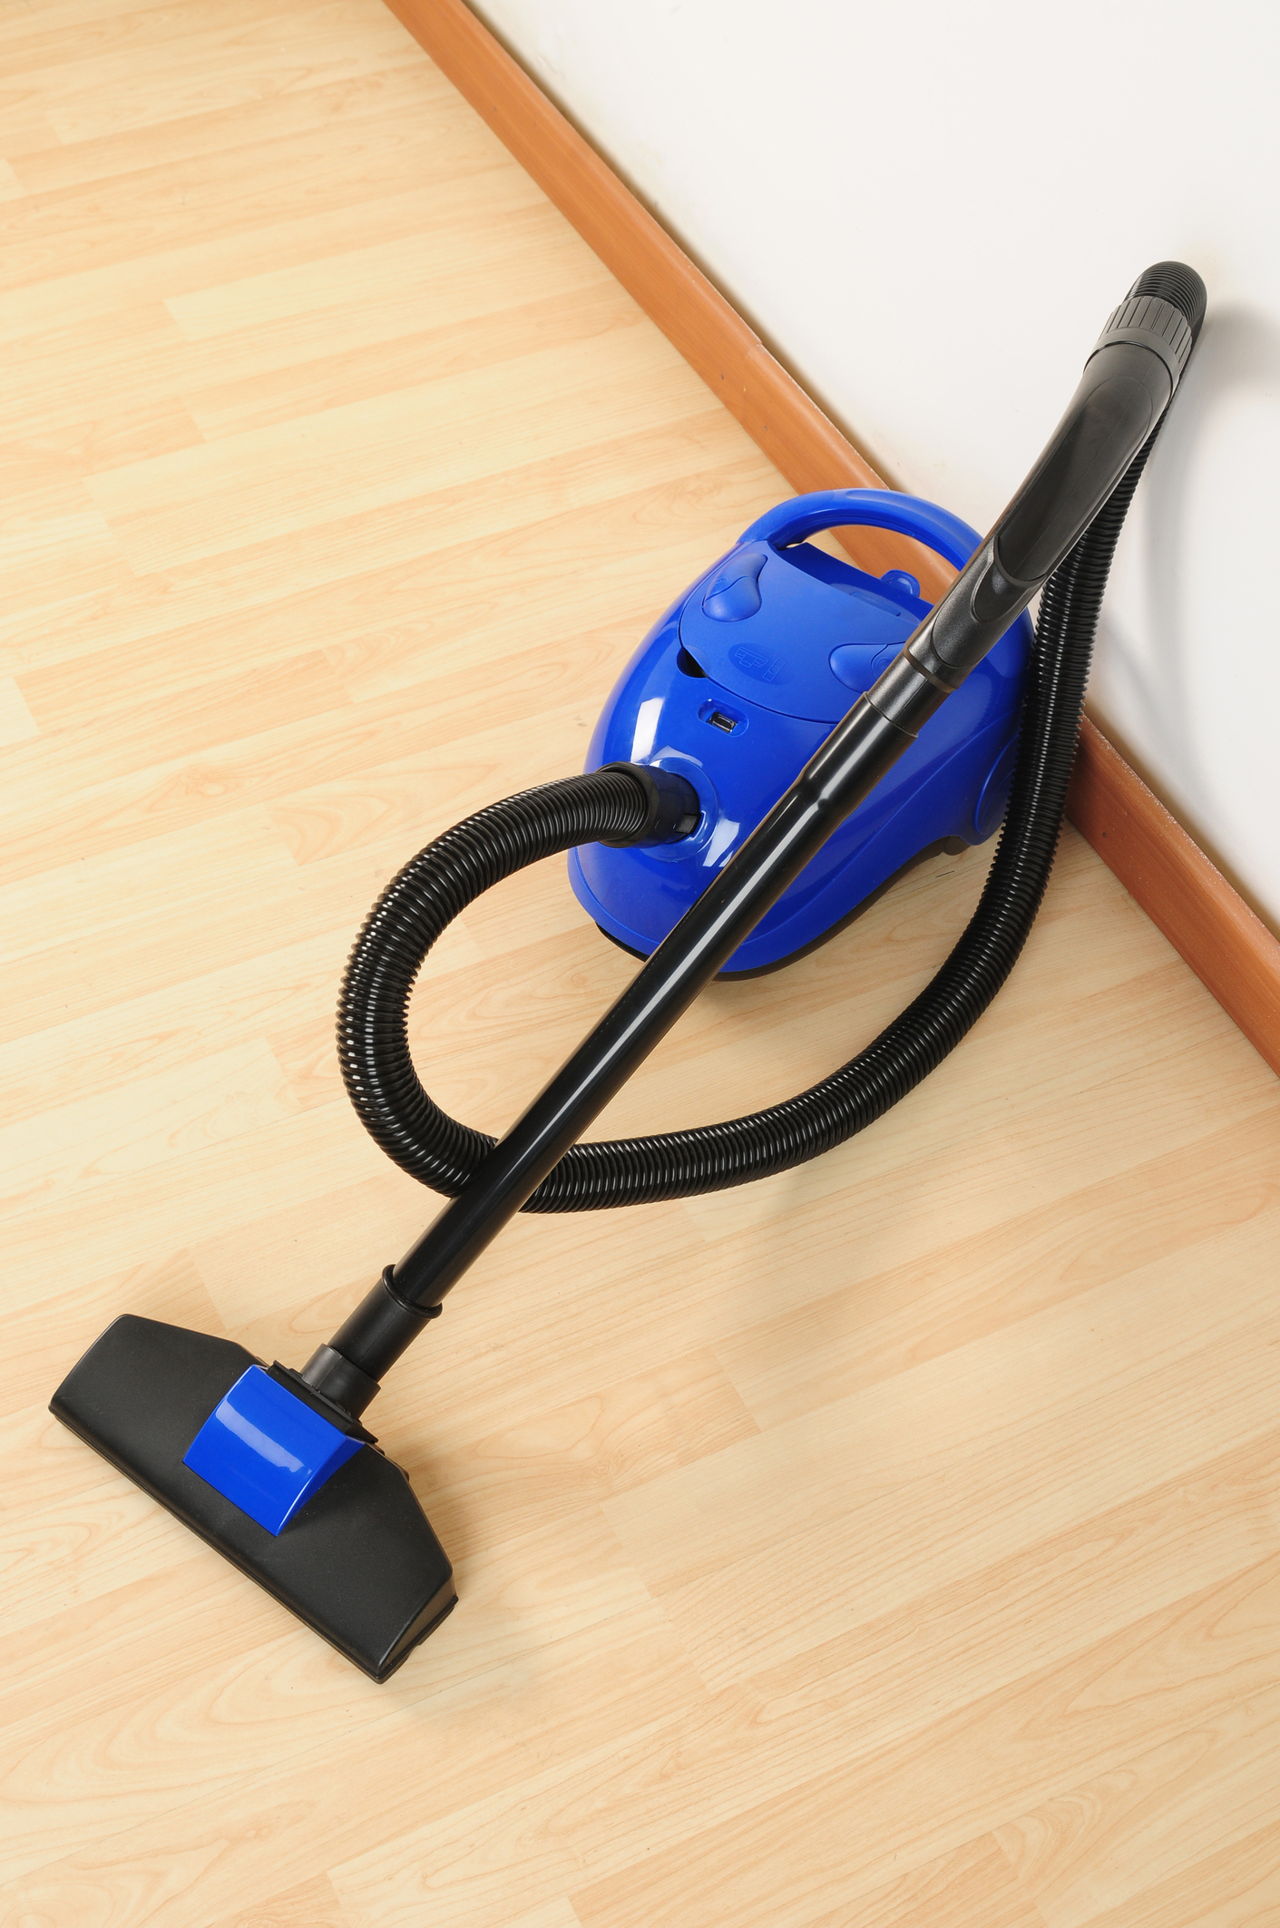 Clean Laminate Floors Without Streaking, Clean Laminate Floors Without Residue